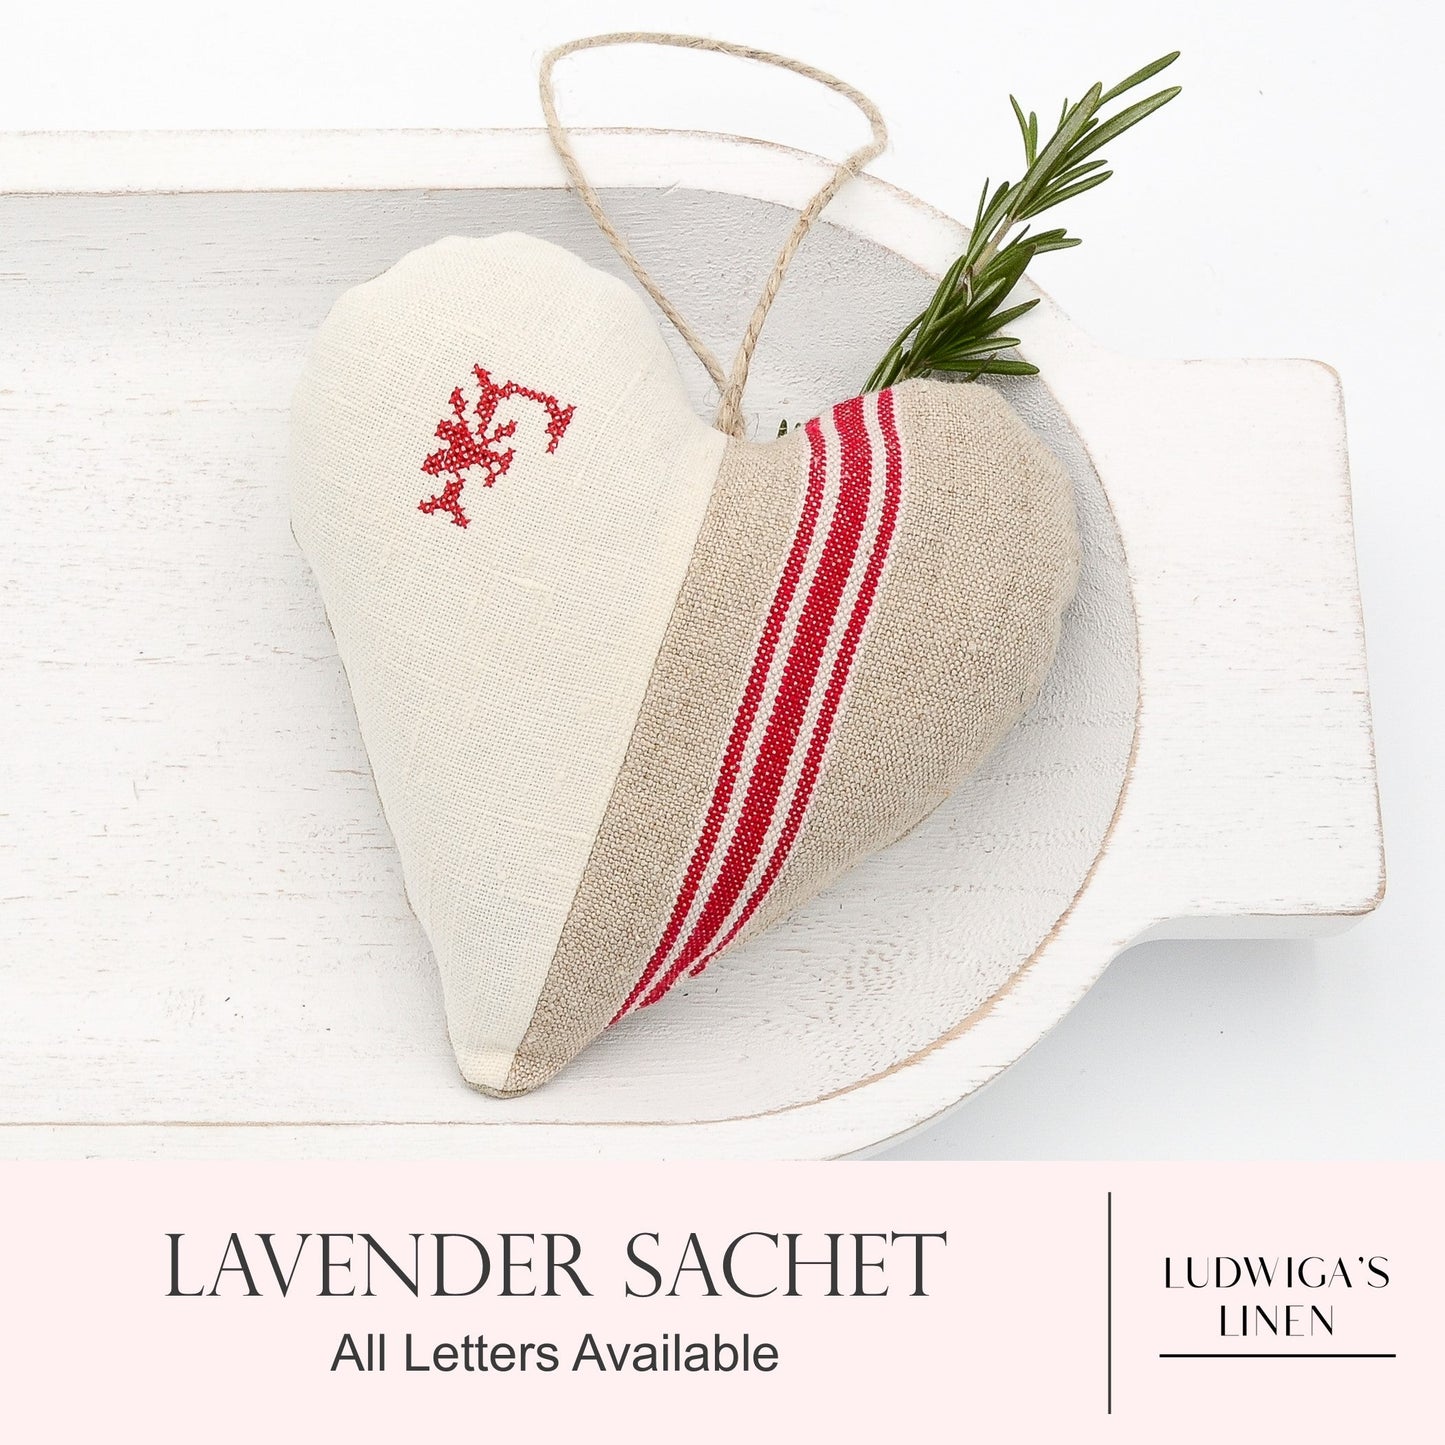 Antique/vintage French/German linen and red-striped mangle cloth linen lavender sachet heart with monogram, hemp twine tie and filled with high quality lavender from Provence France